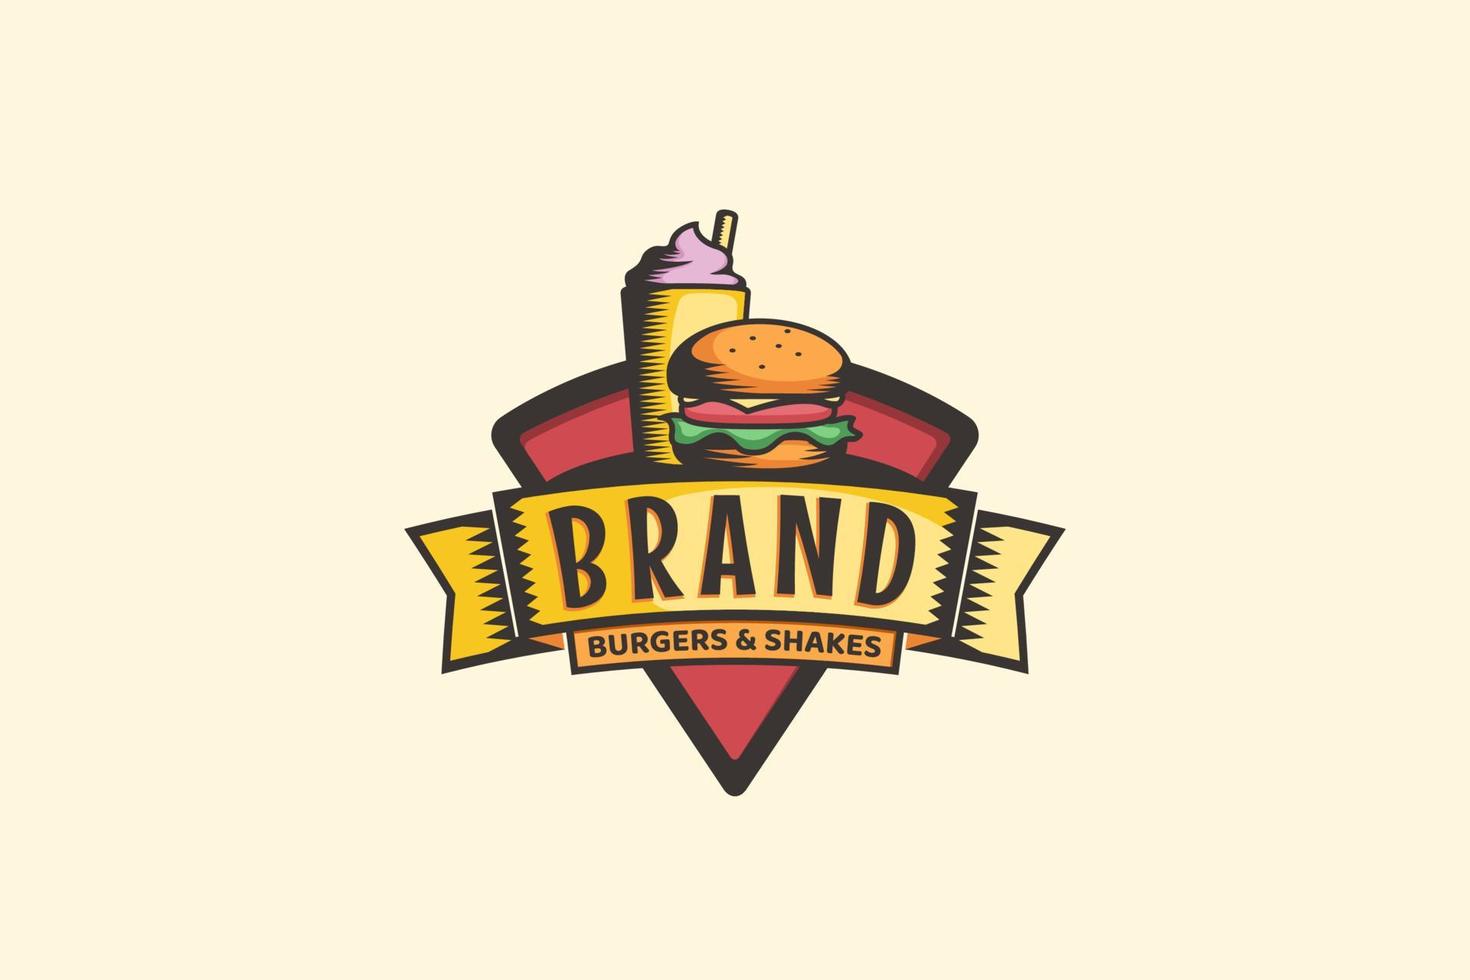 burger and shakes logo for any business especially for fast food, restaurant, cafe, etc. vector